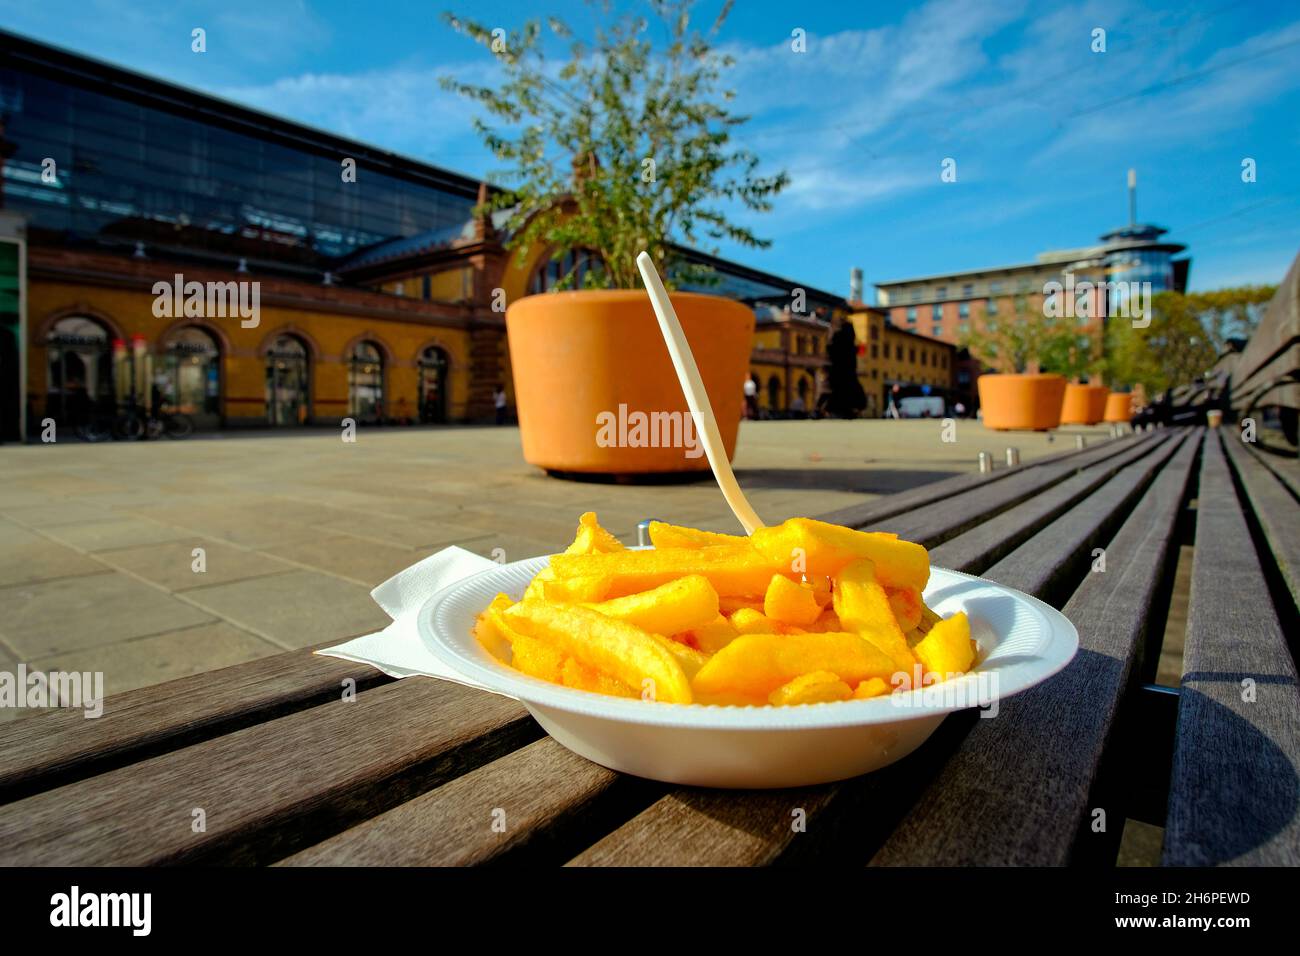 Plate of crisps ready to eat outdoors in town square Stock Photo